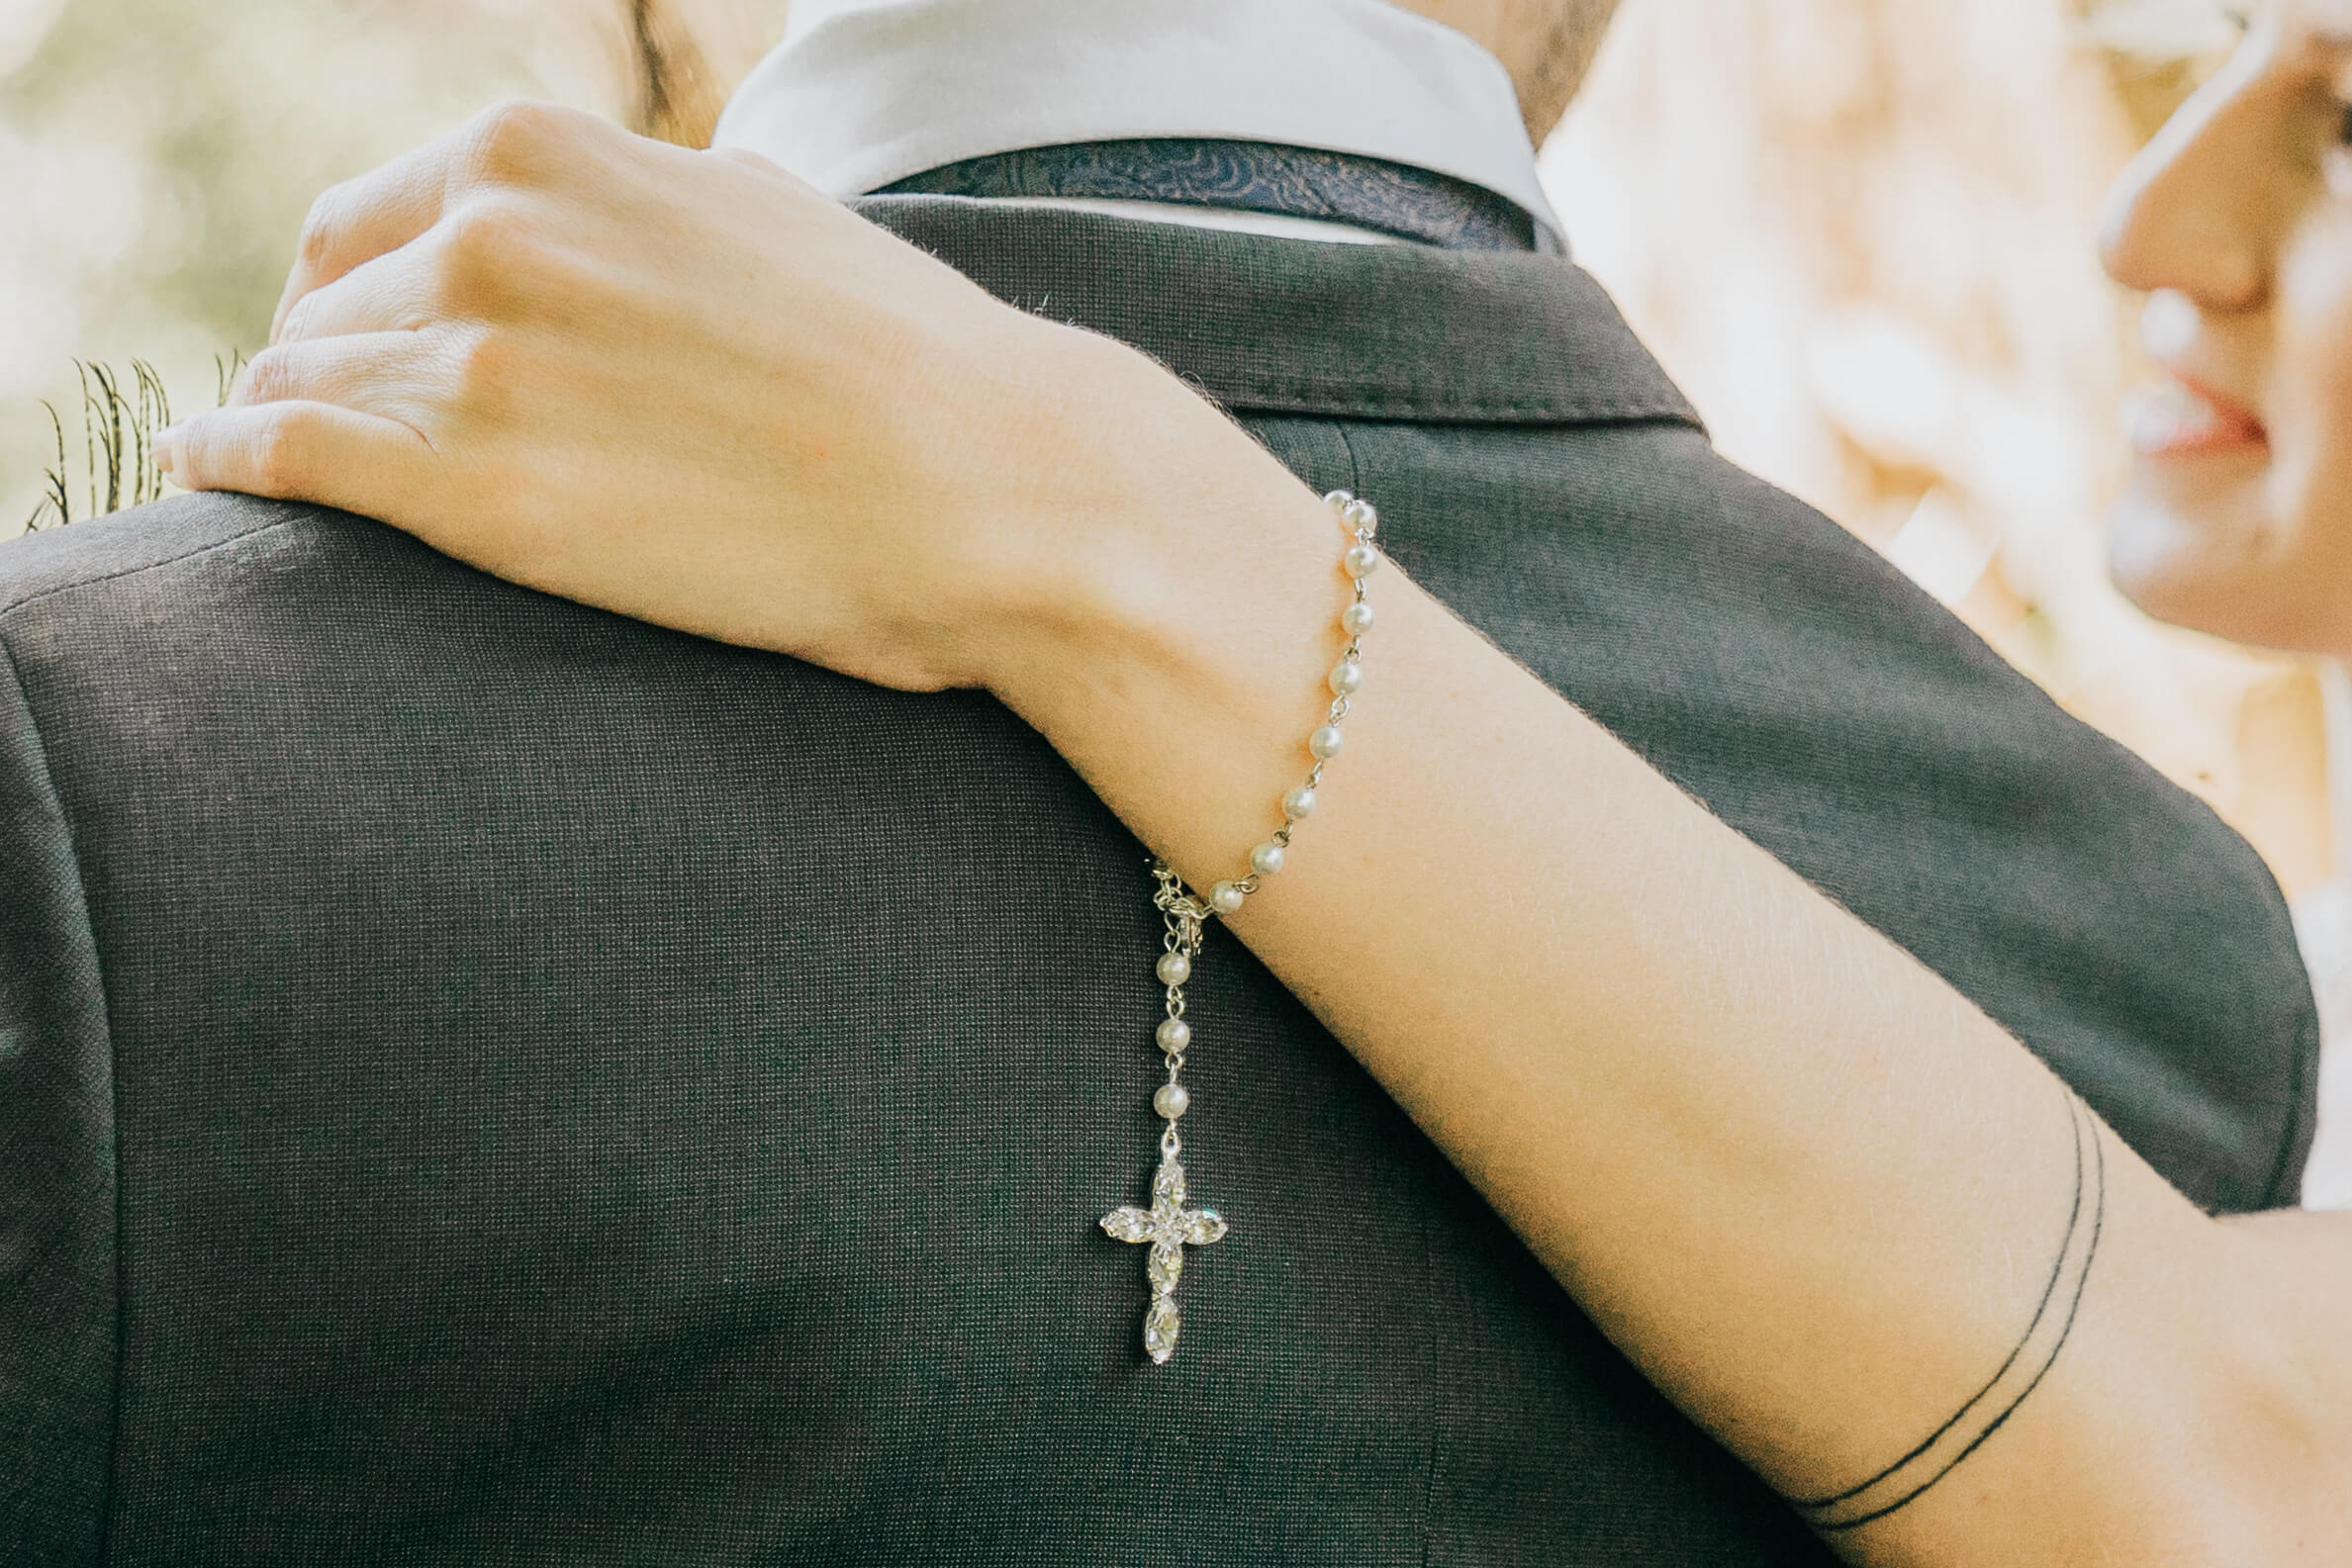 Narrative Portraiture - The bride placing her hand on the groom's back and showing a rosary bracelet